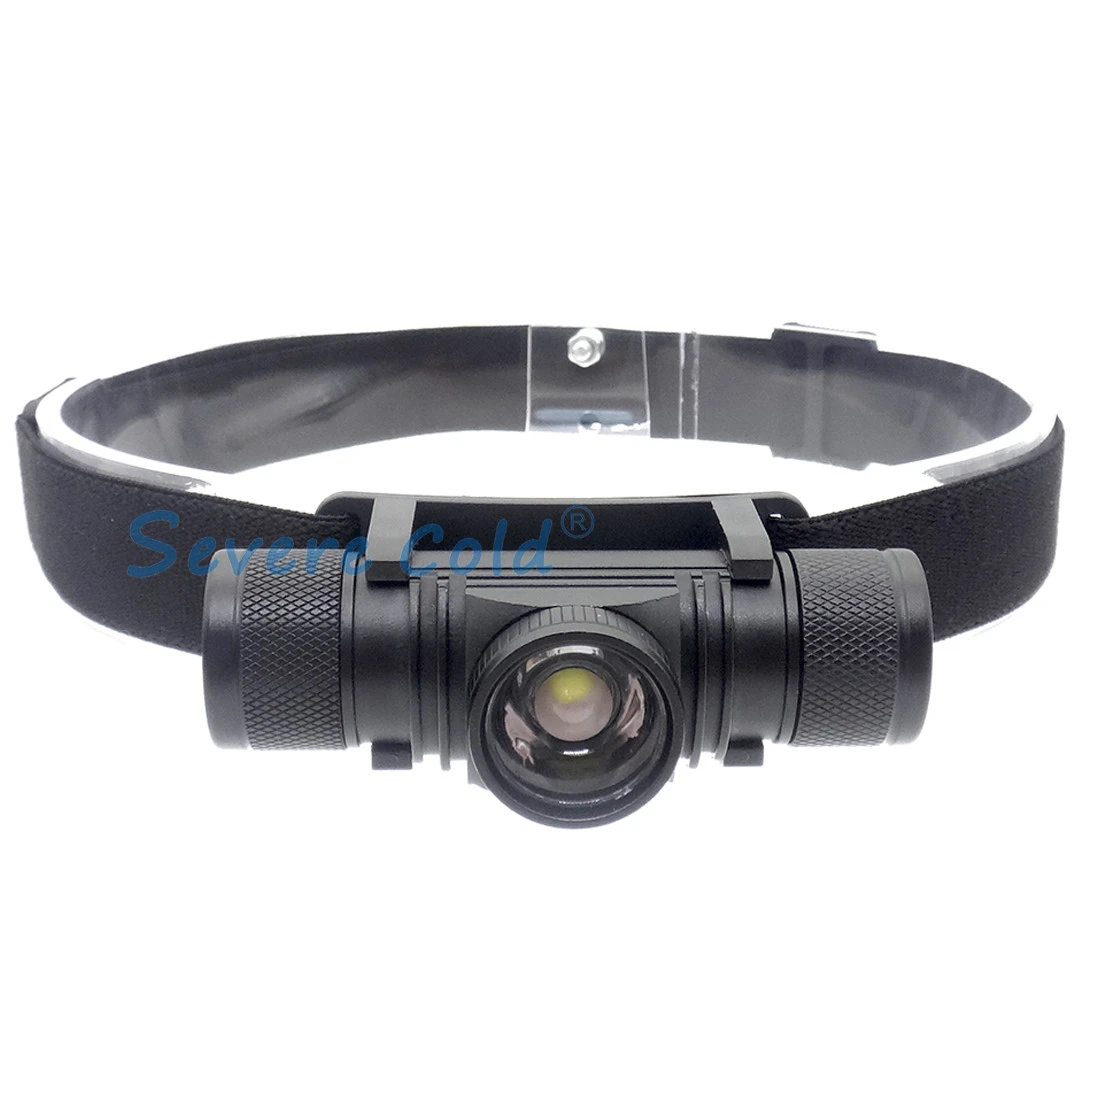 NEW Style USB Rechargeable LED Light Headlamp Aluminum Alloy Waterproof Outdoor Light Headlamp LED Rechargeable